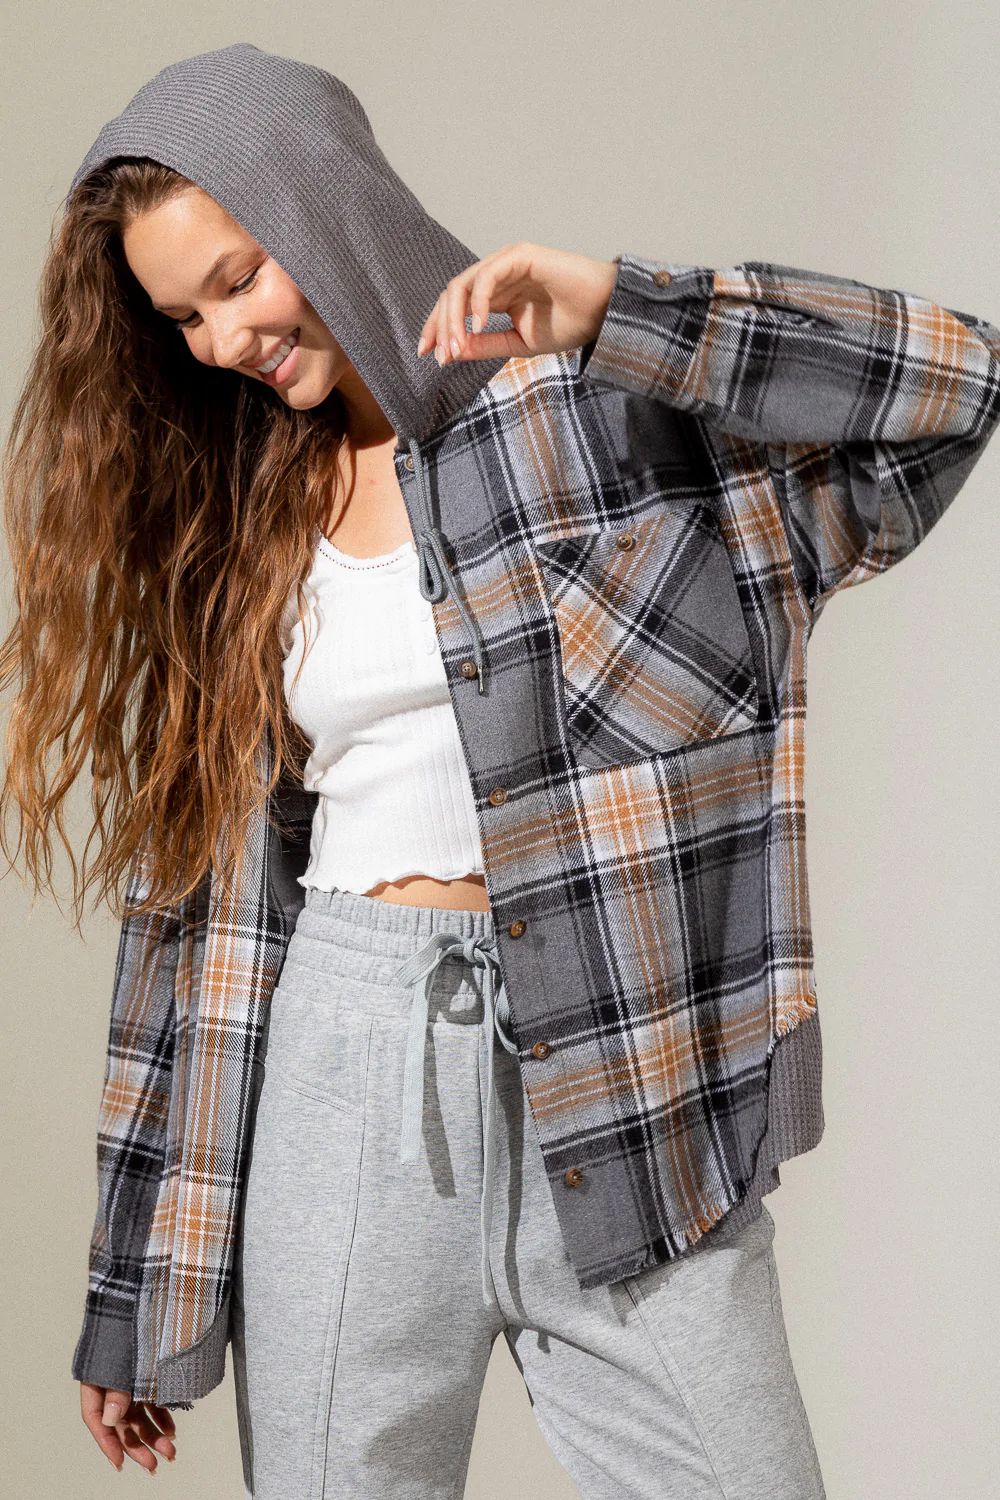 Winter Waffle Hooded Spliced Plaid Blouse Coat for Women